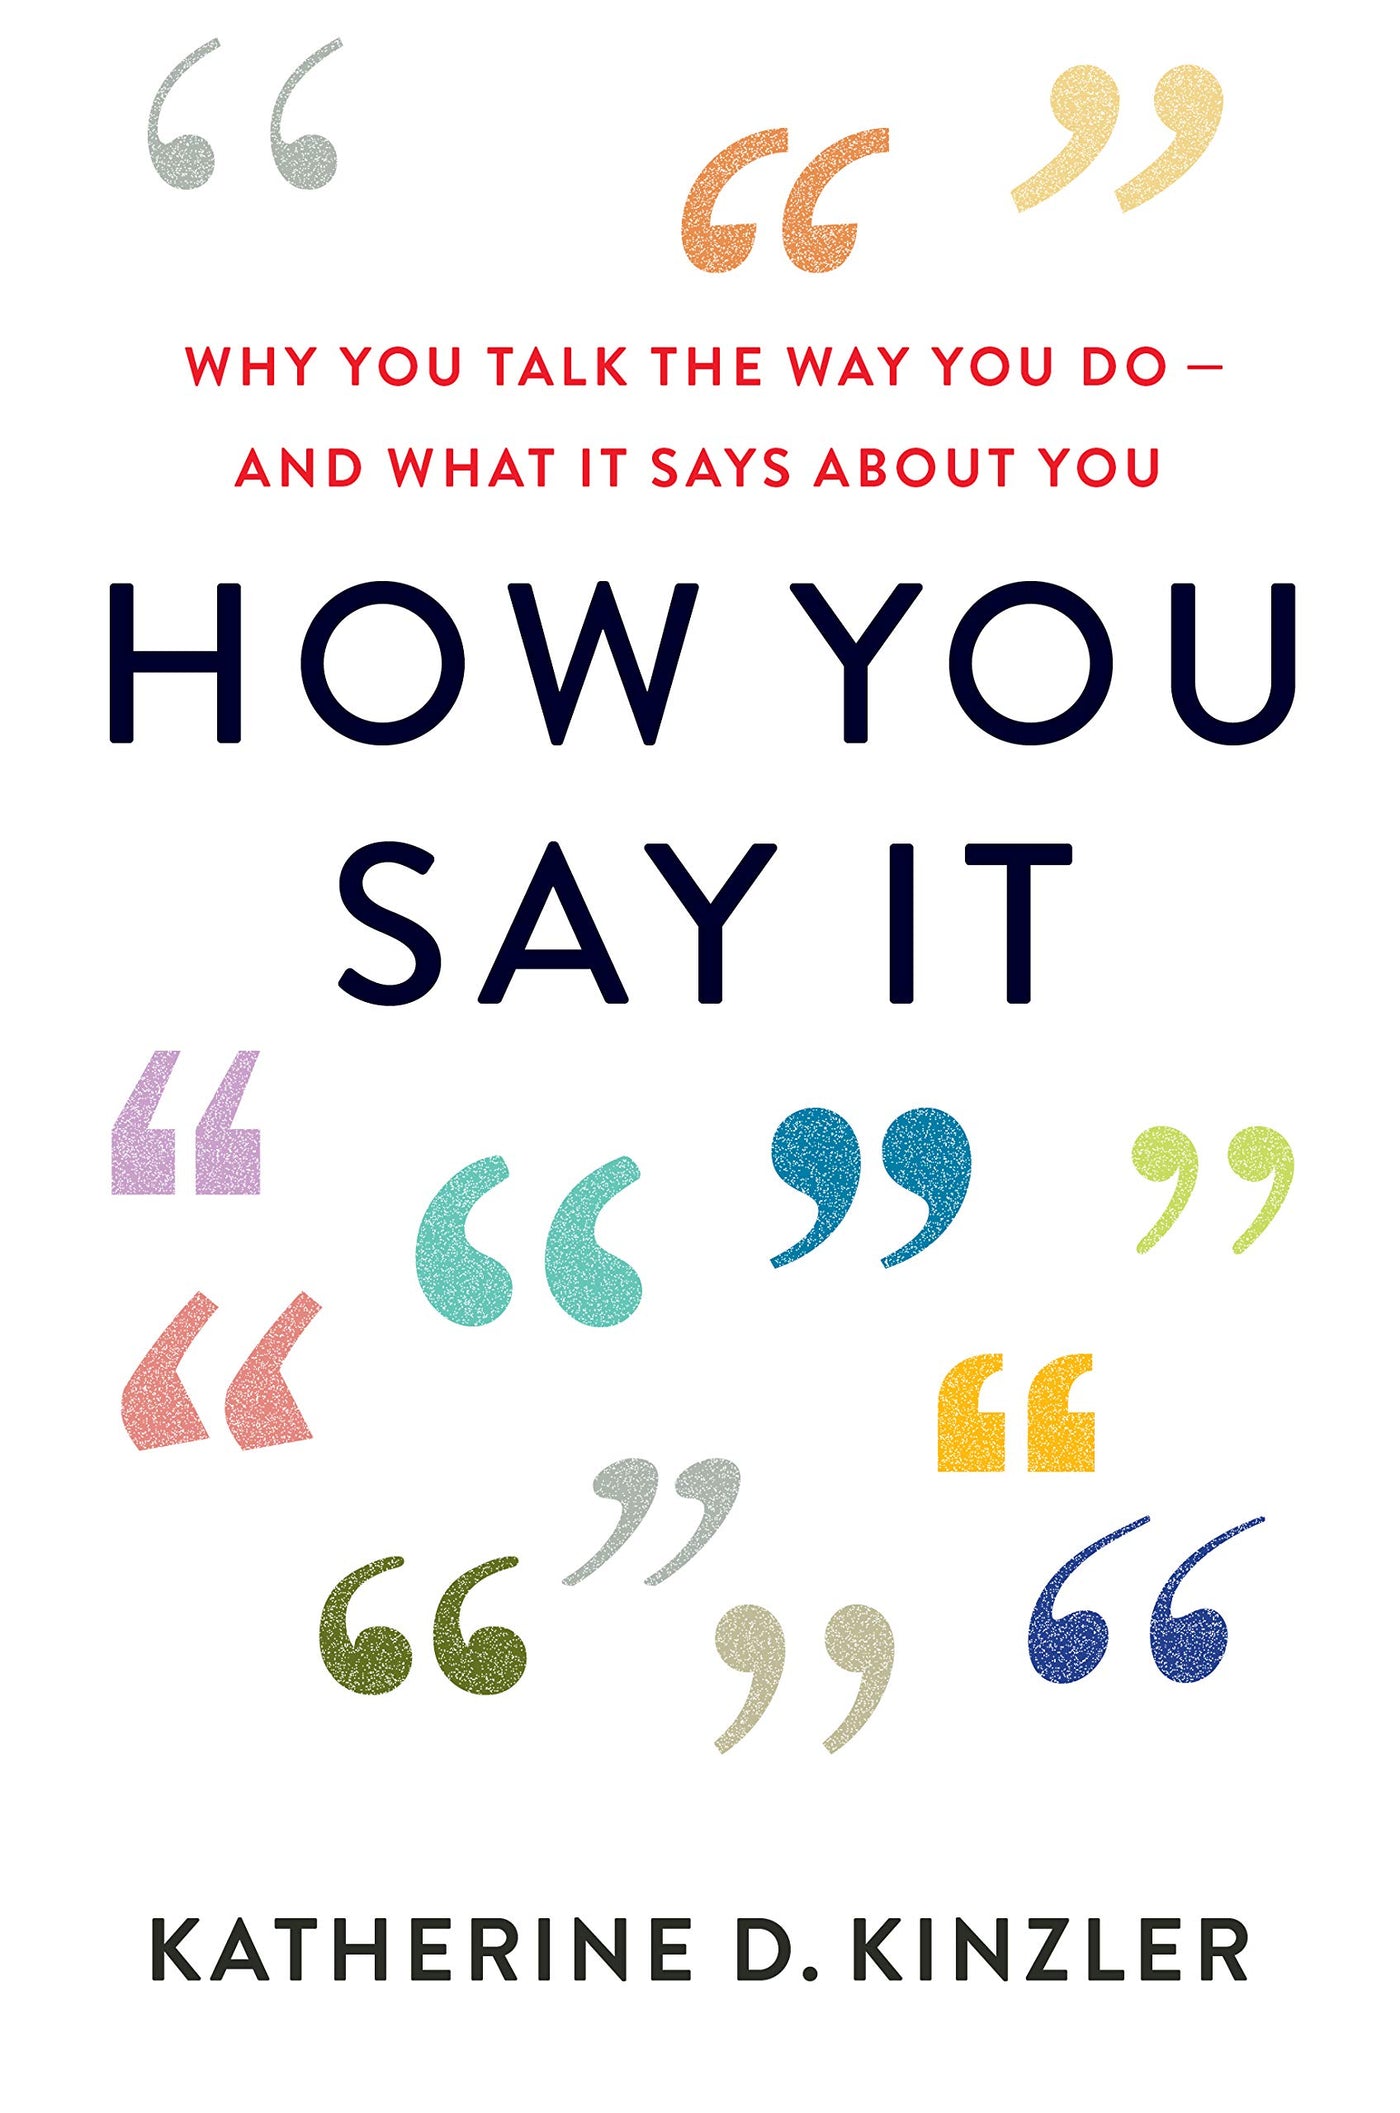 How You Say It by Katherine D. Kinzler